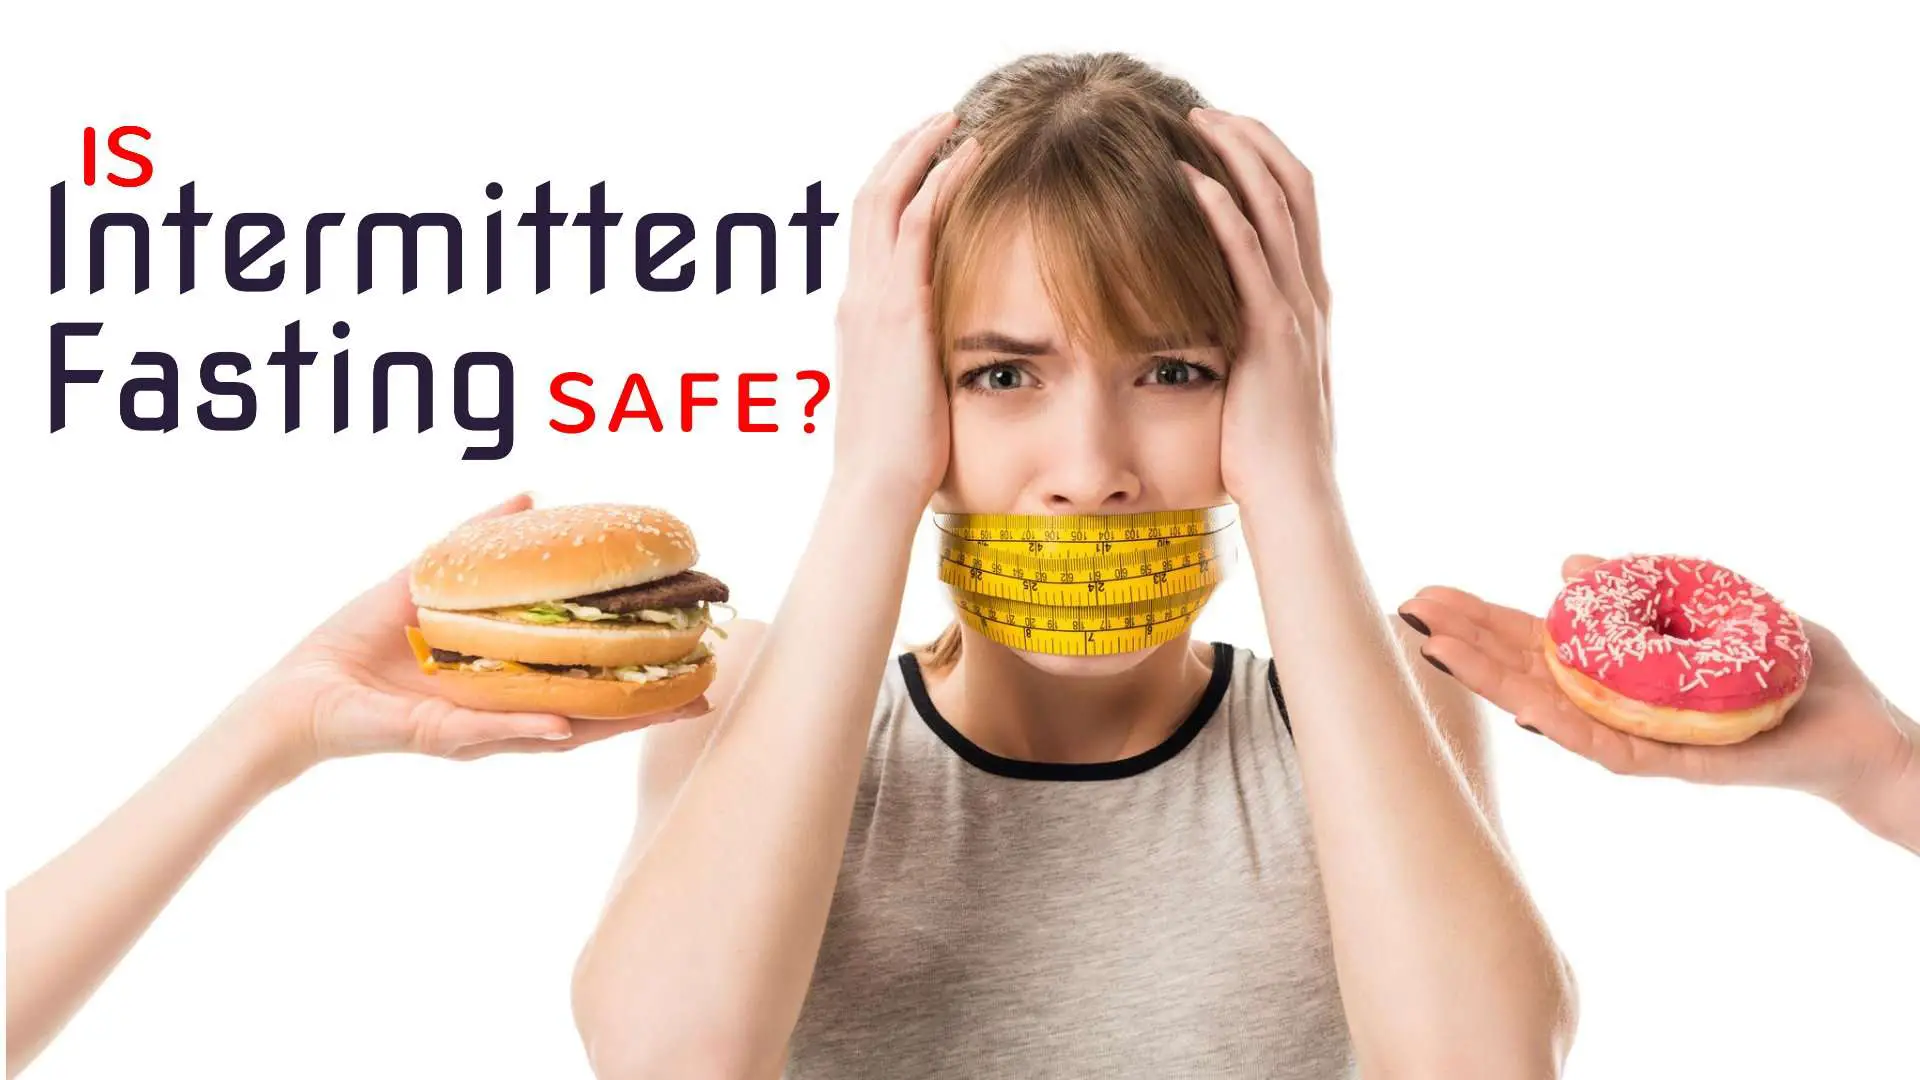 Is Intermittent Fasting Safe in 2020?